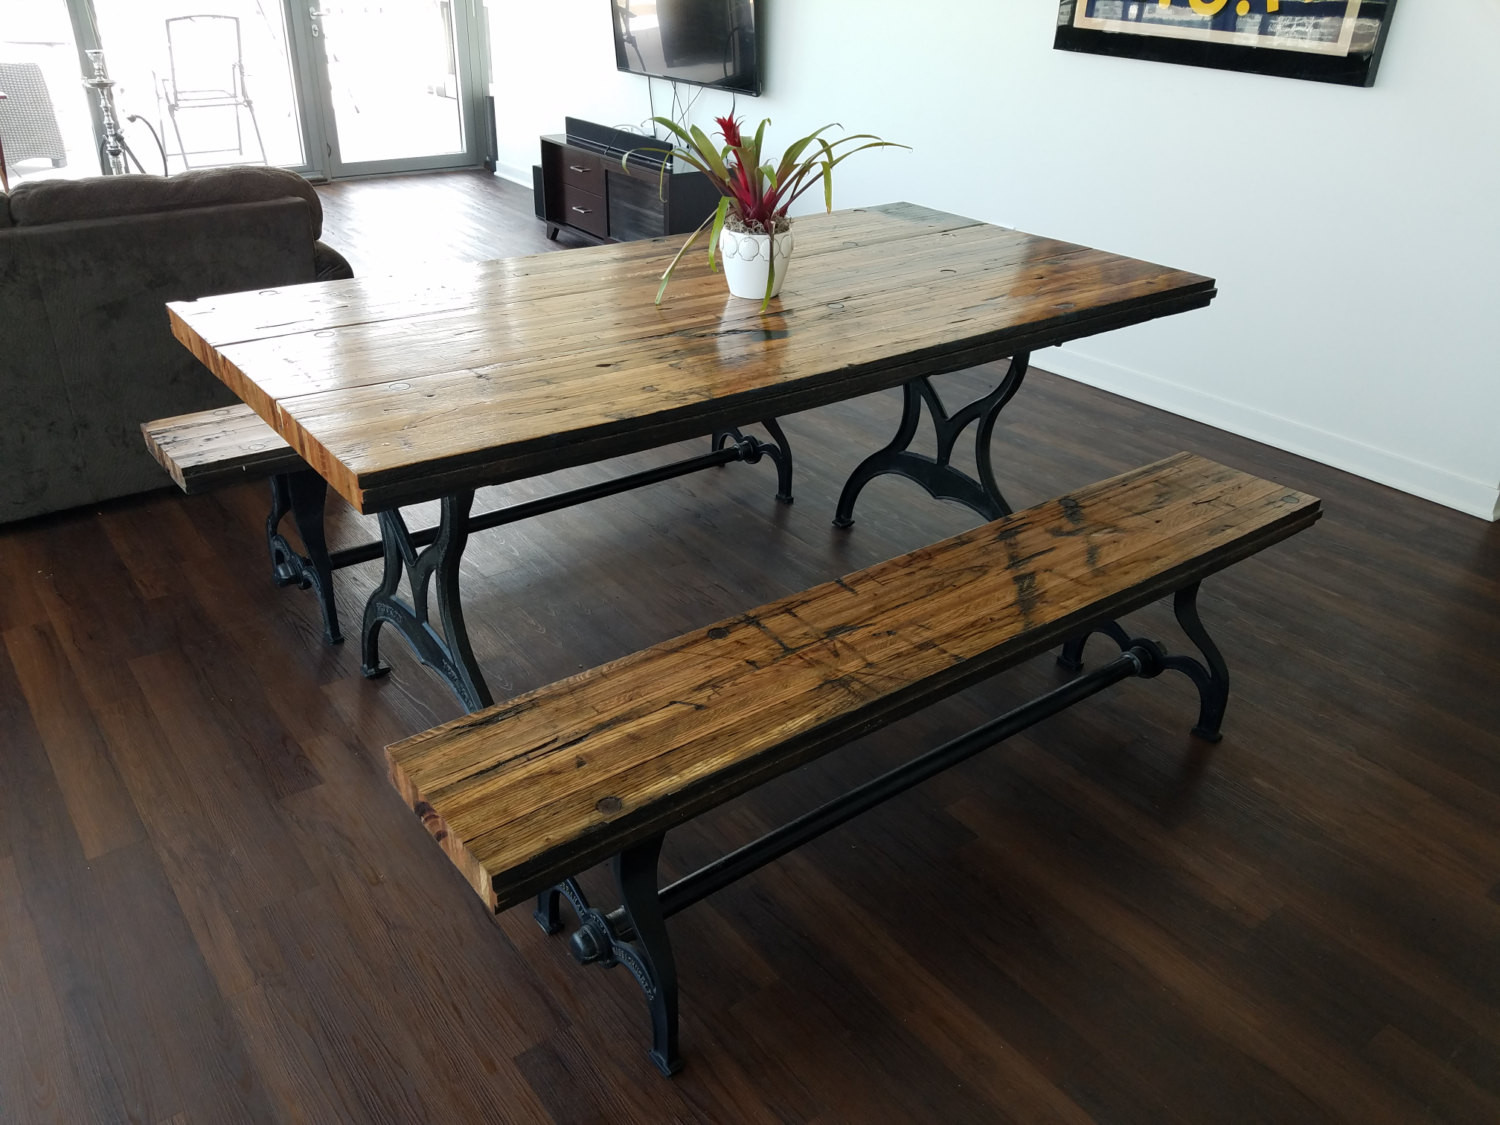 Rustic Kitchen Tables With Bench
 Reclaimed Oak Boxcar Plank Table with benches Recycled